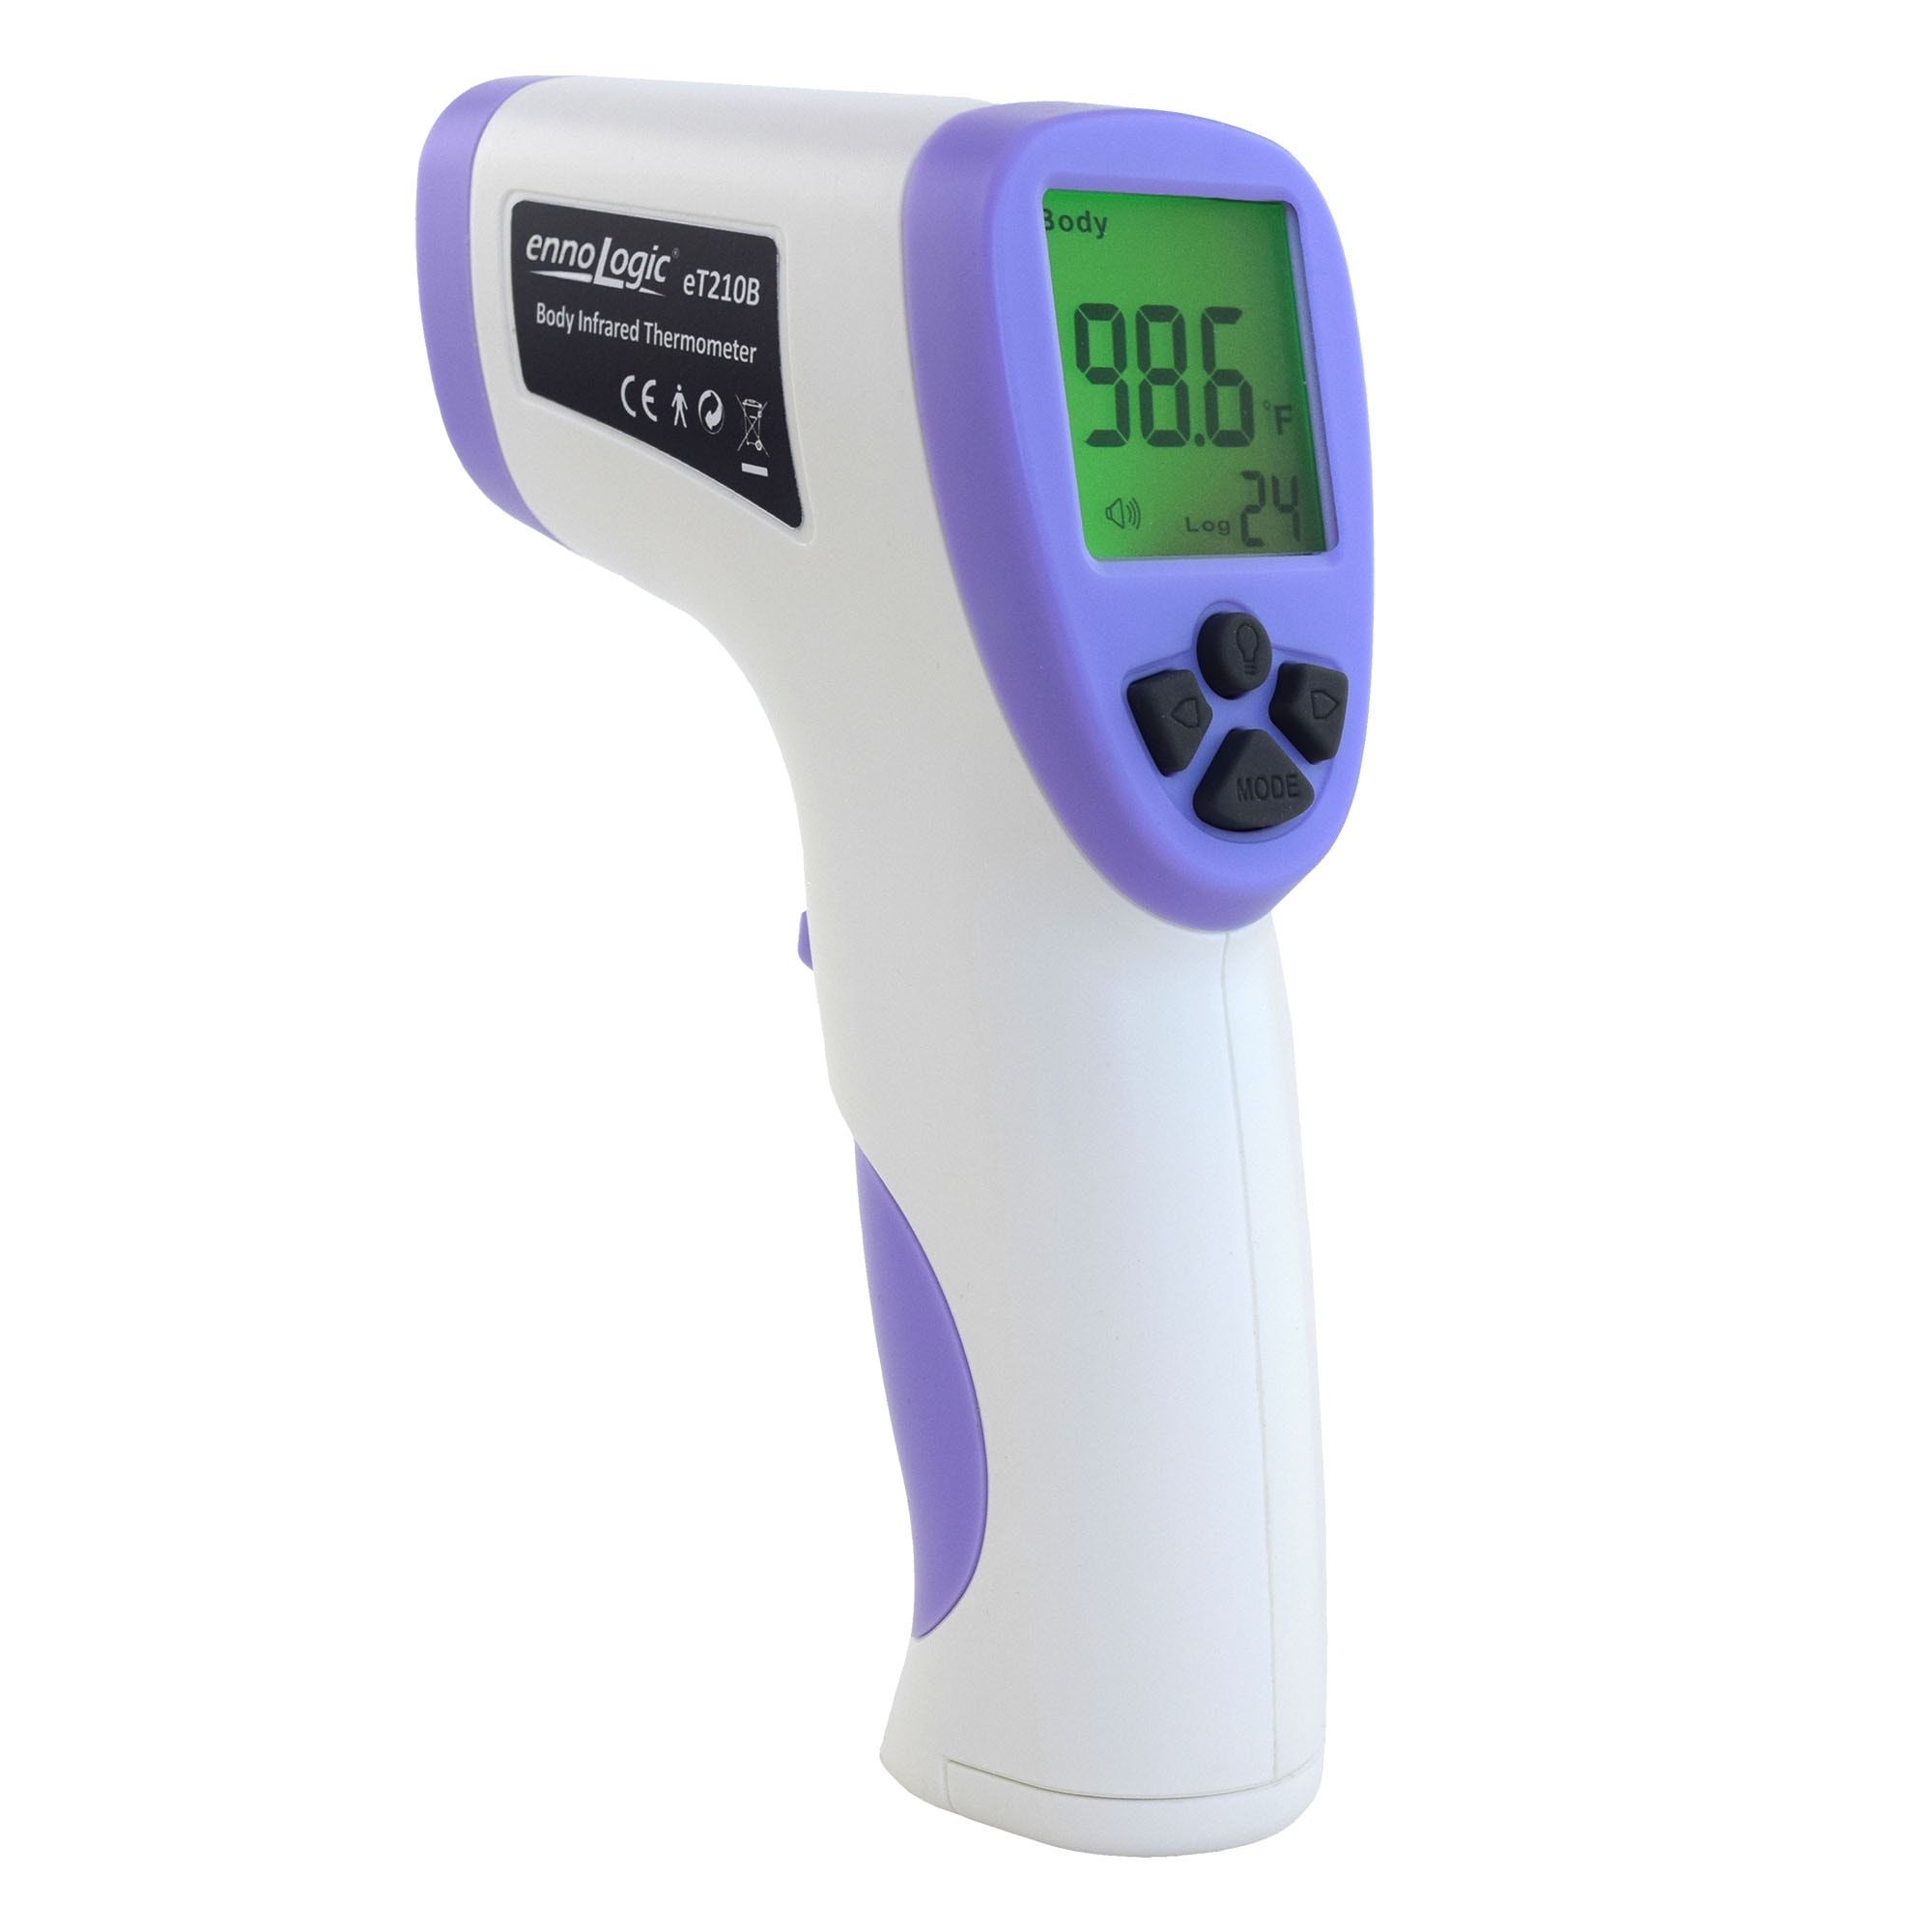 Non-Contact Forehead Infrared Thermometerer ennoLogic eT210B